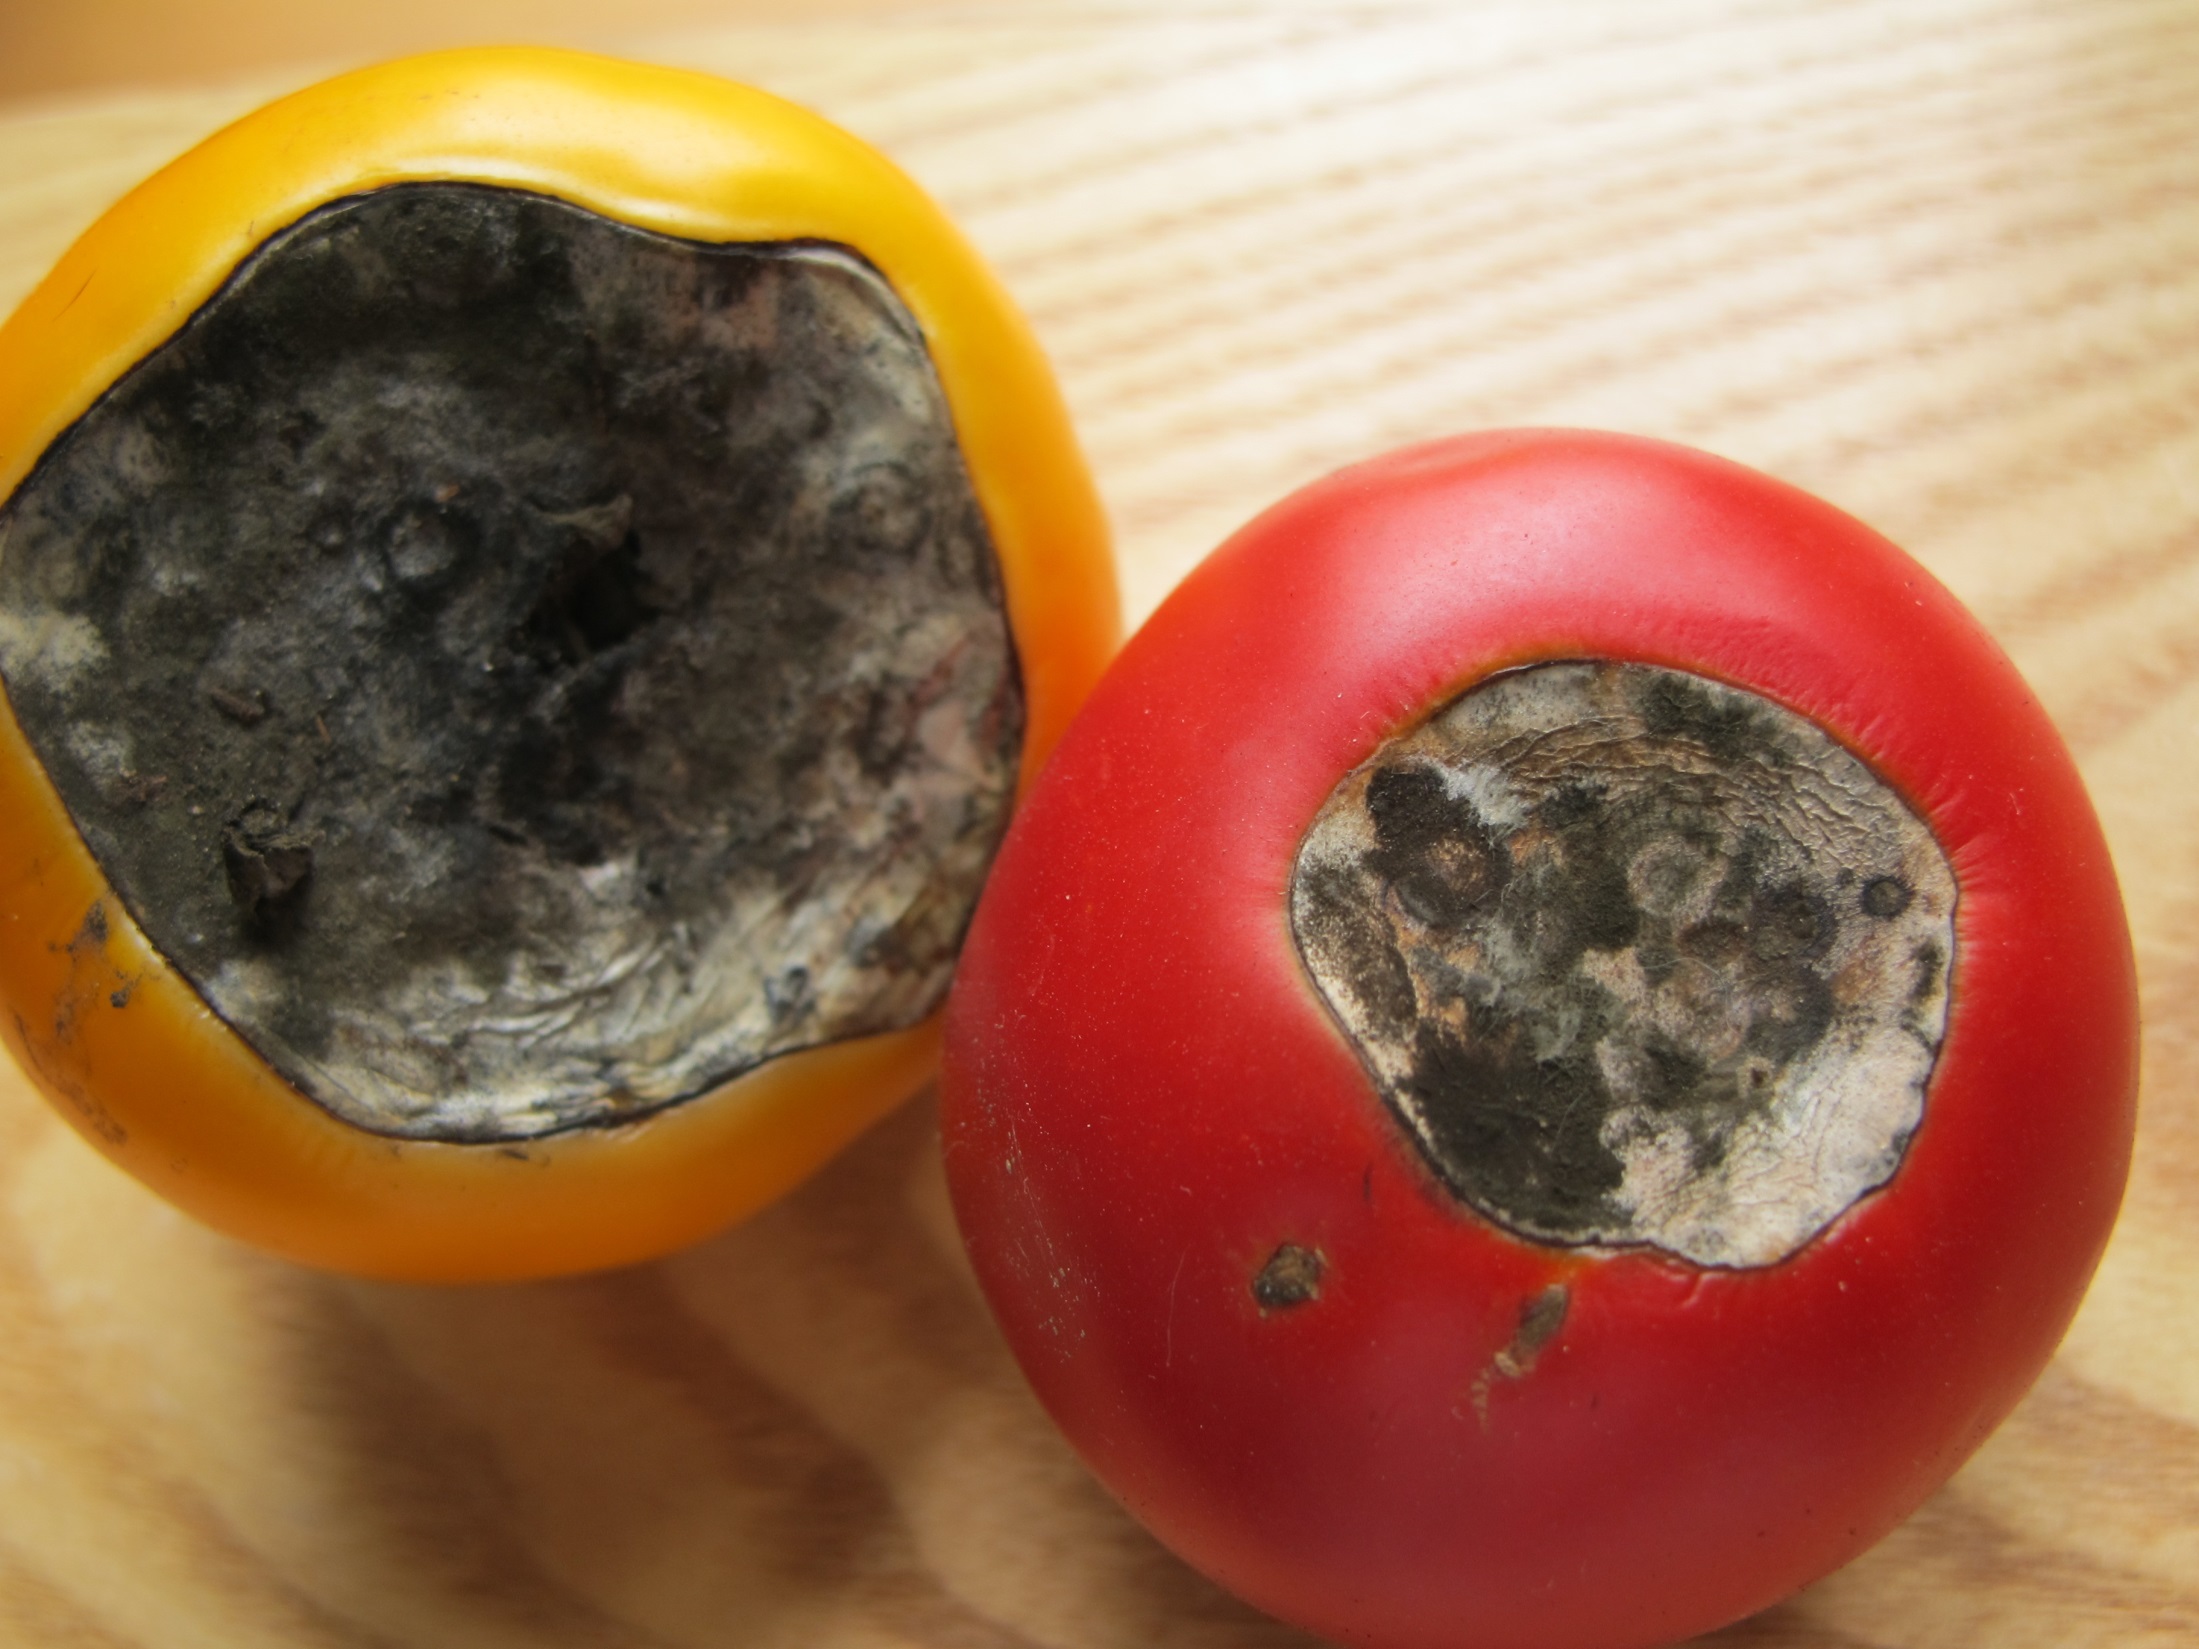 Top 5 Tips To Help You Care For Your Tomato.